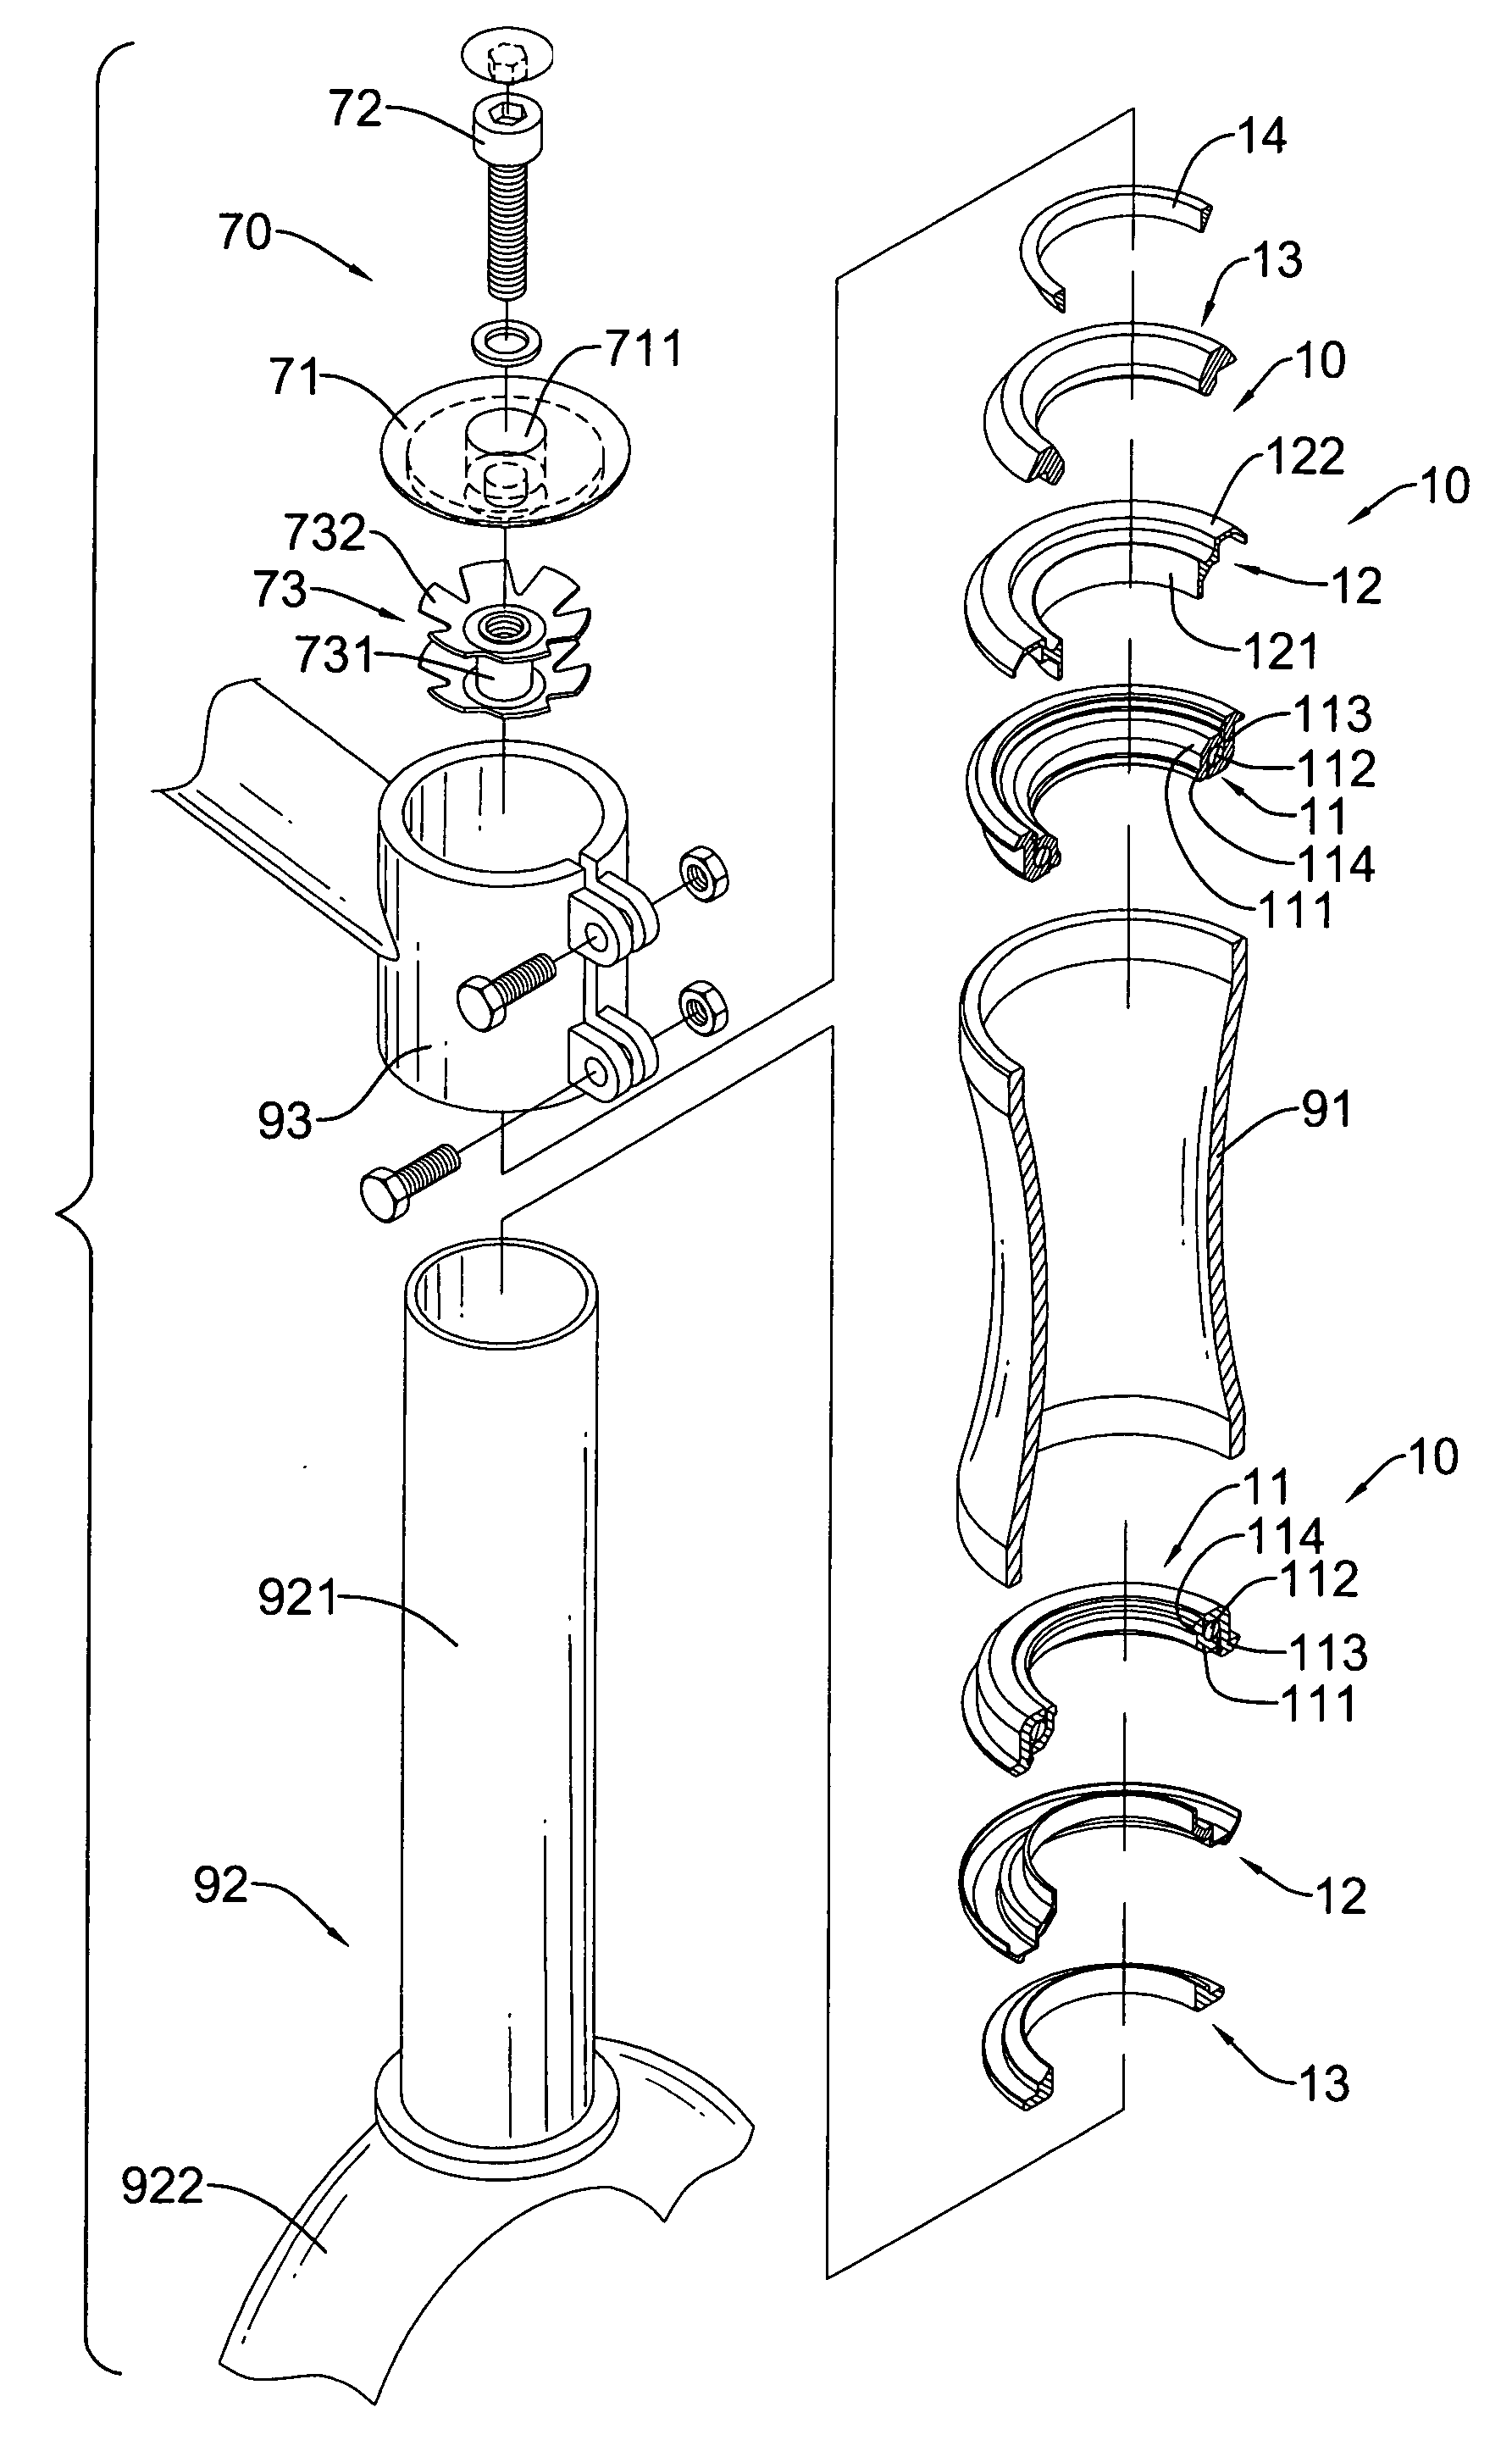 Bearing assembly for a steering apparatus of a bicycle